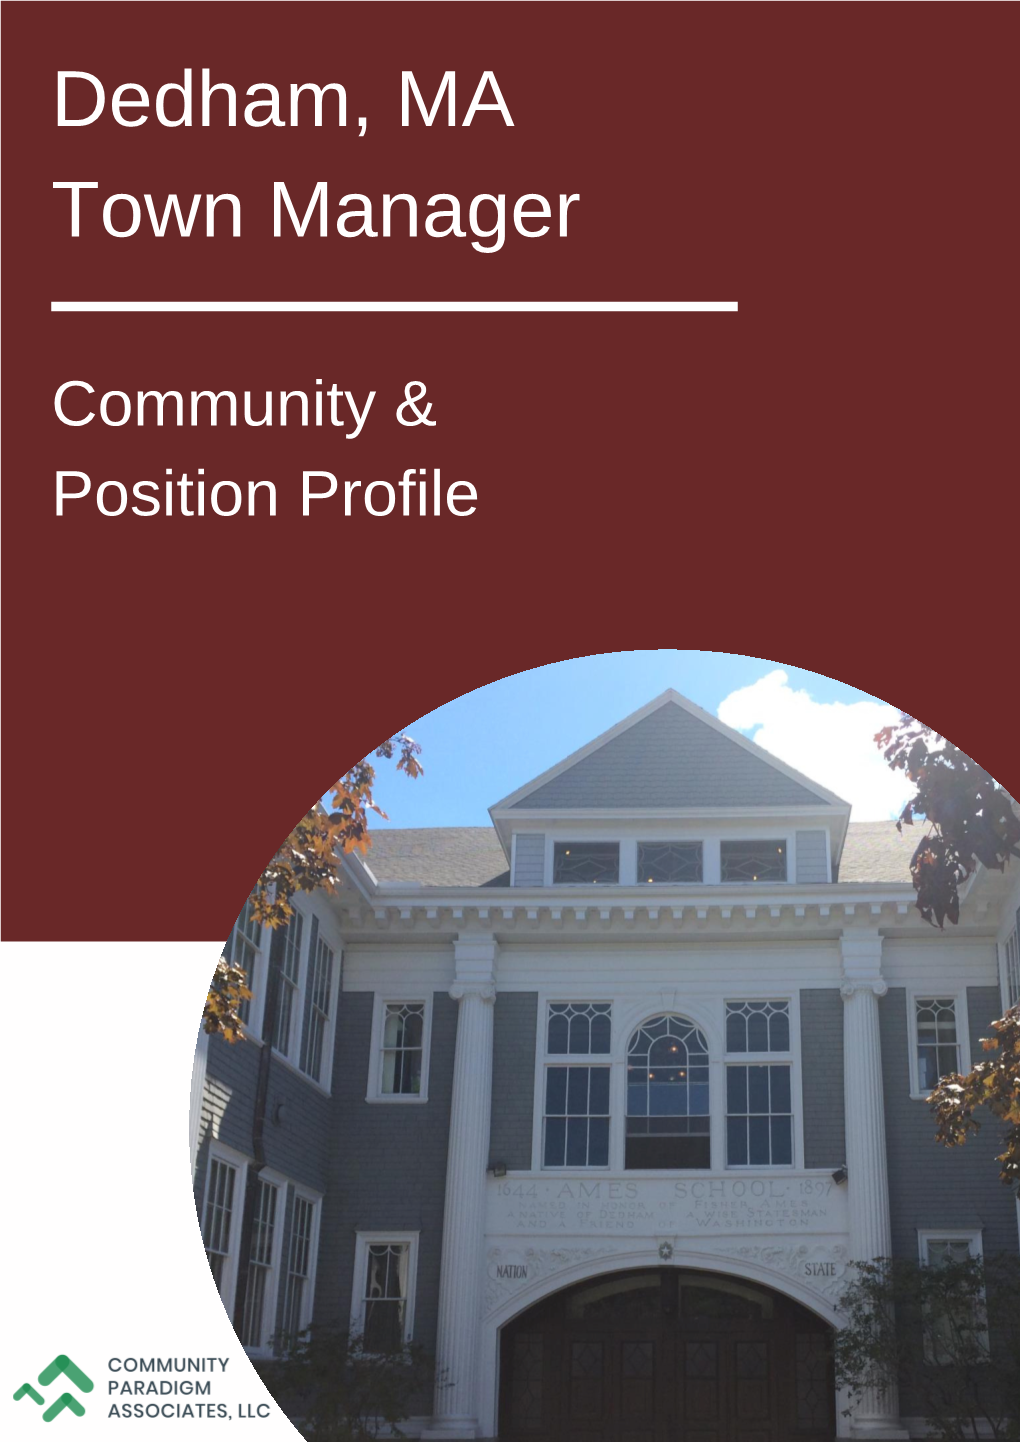 Dedham, MA Town Manager